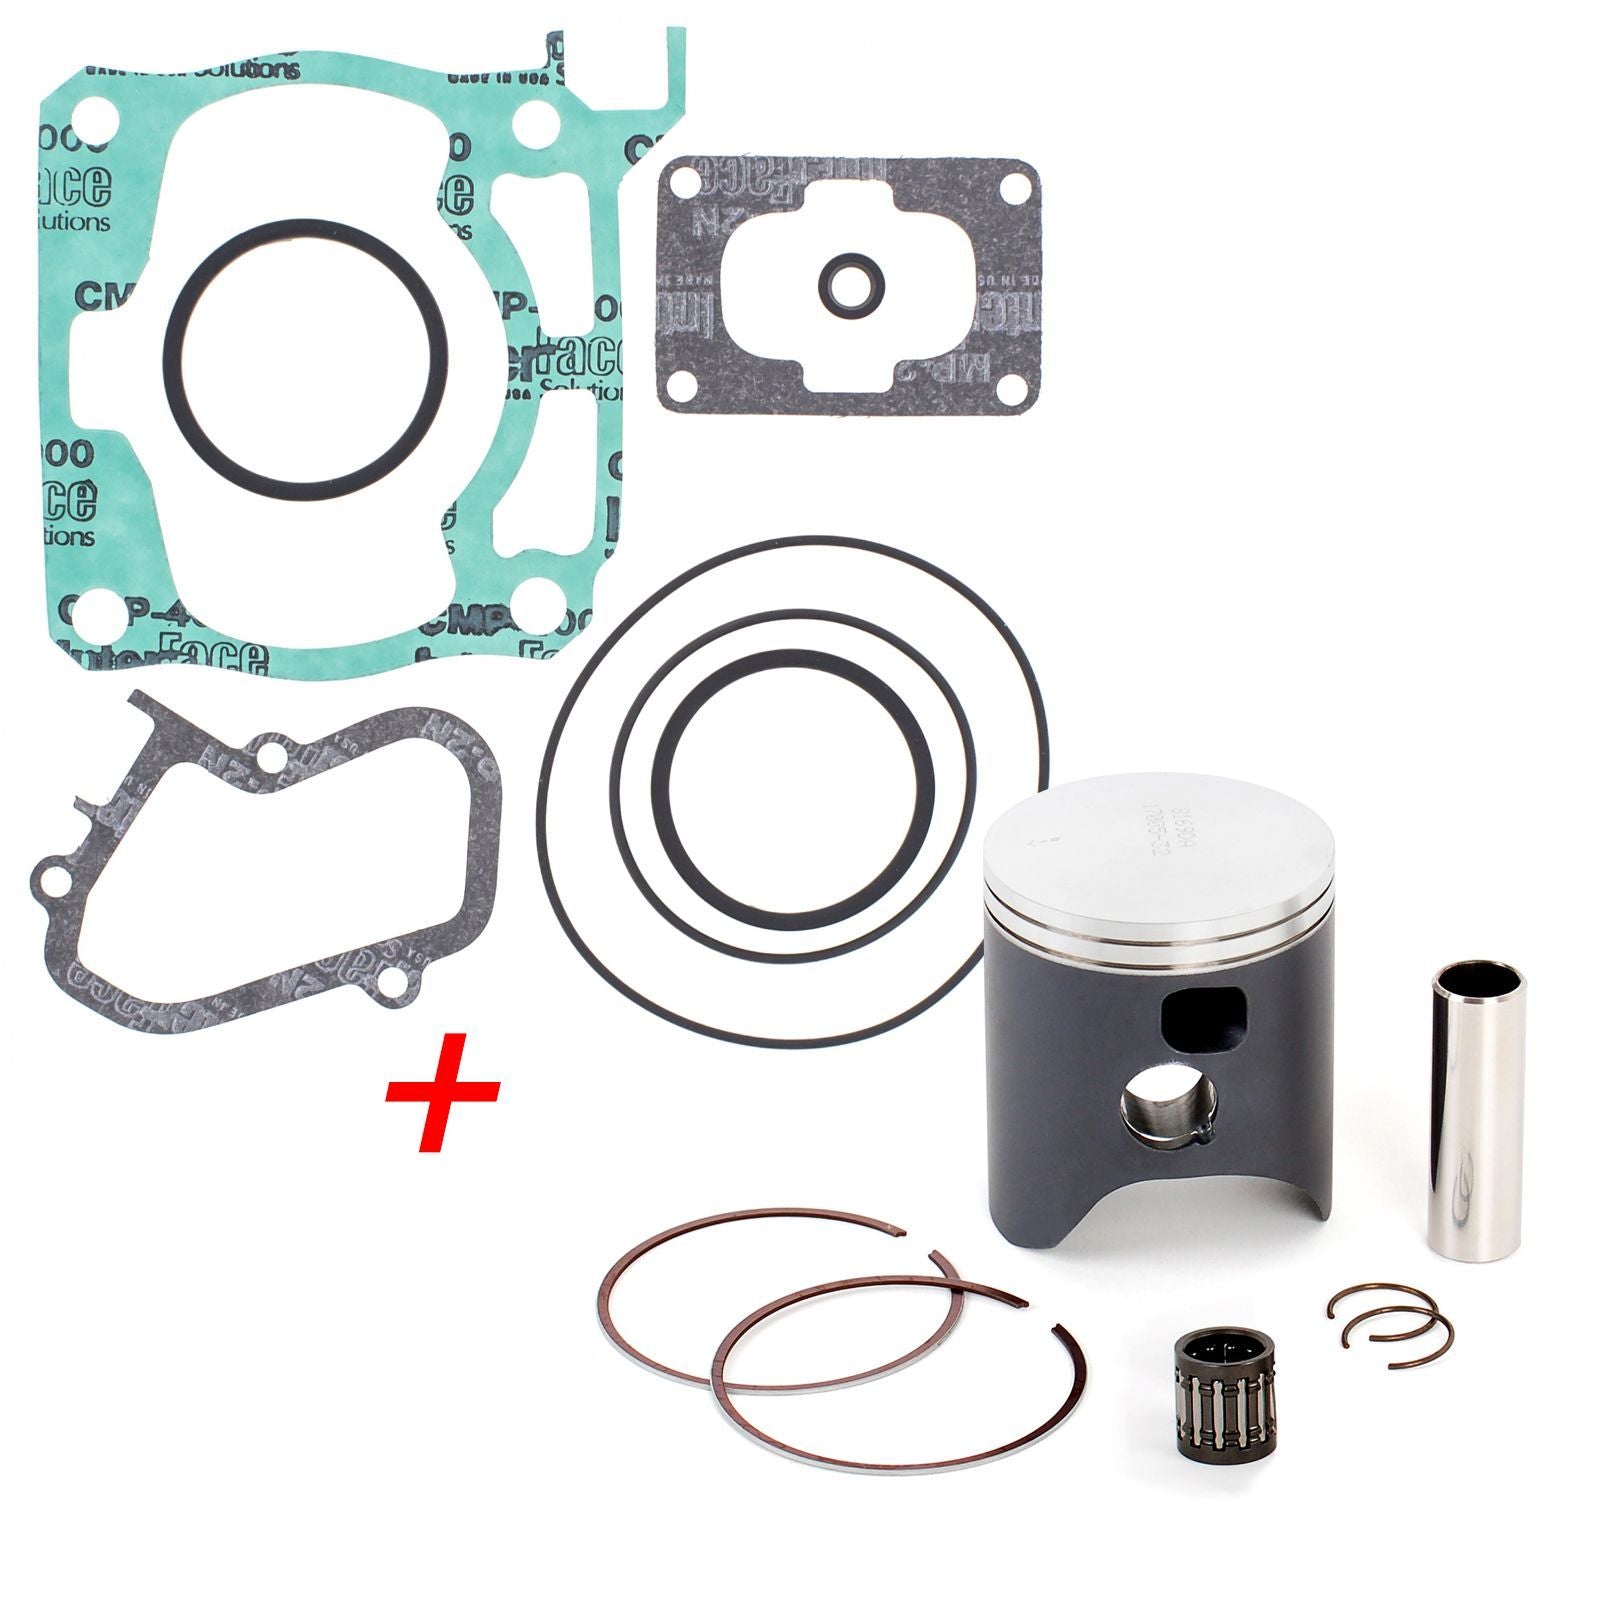 New Top End Rebuild Kit (A) For Honda CR125 1990-1991 #ERTH027A